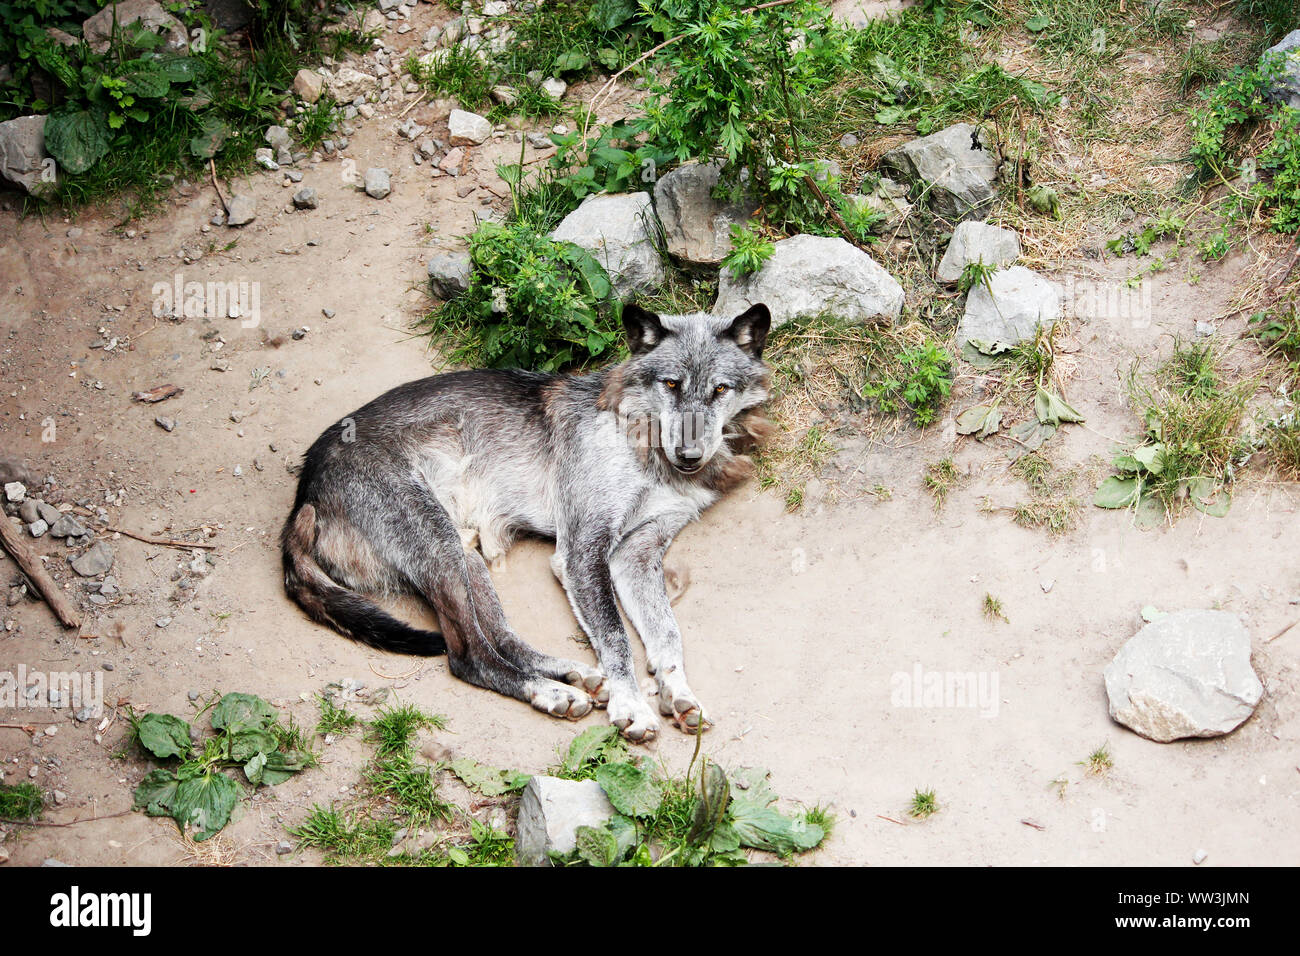 A Timberwolf, Canis lupus lycaon, also called Eastern Wolf, Great Lakes Wolf or Algonquin Wolf, which observes the area Stock Photo